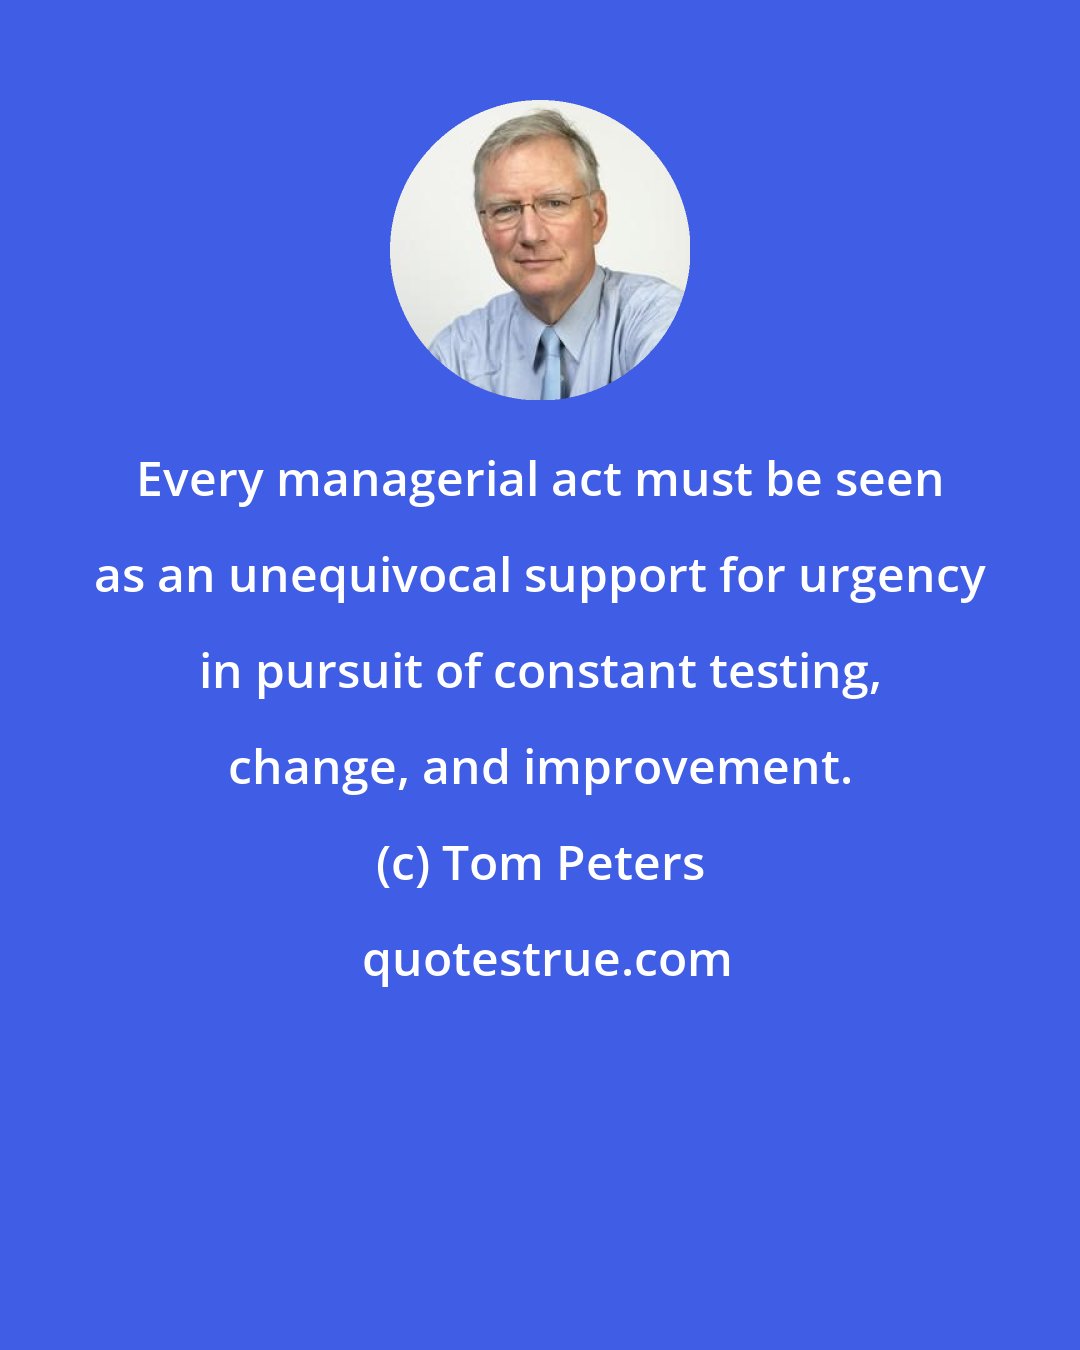 Tom Peters: Every managerial act must be seen as an unequivocal support for urgency in pursuit of constant testing, change, and improvement.